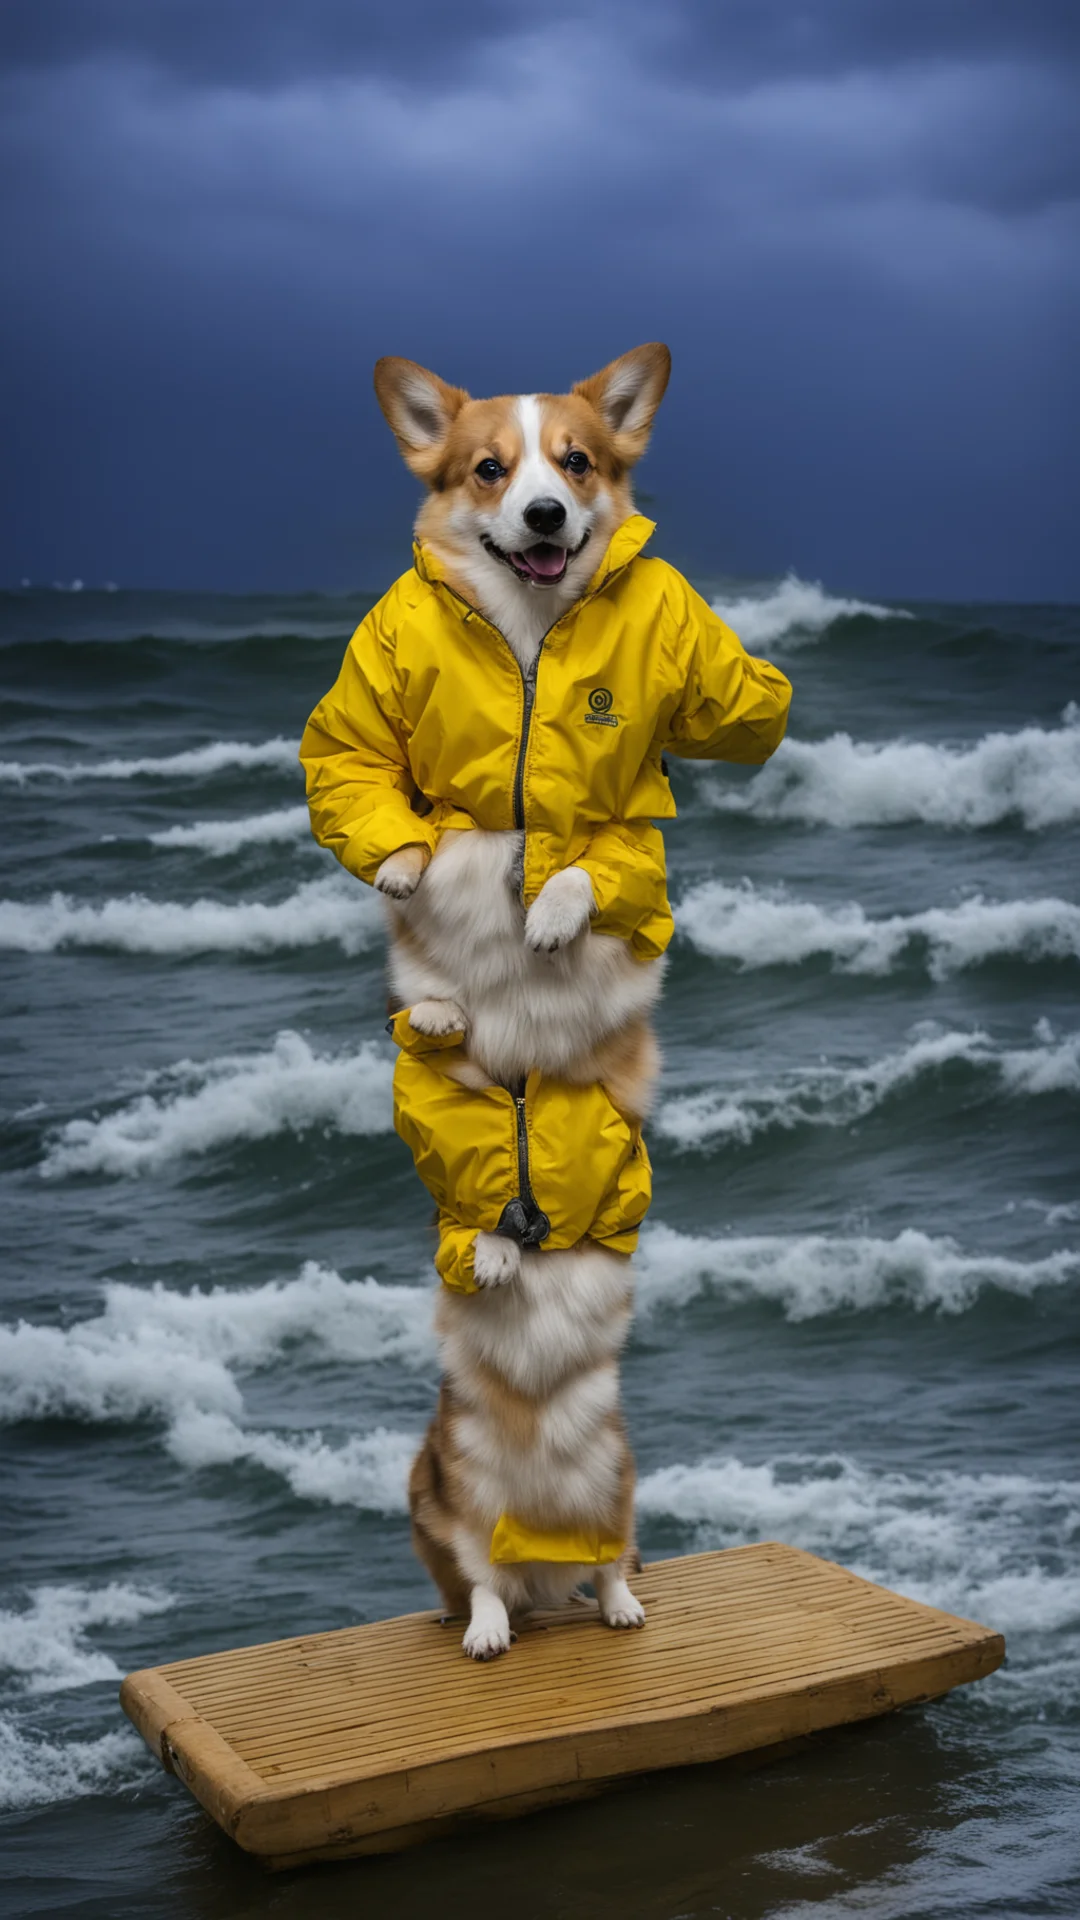 a corgi in a yellow jacket on a bamboo raft in the middle of a tormented ocean during night thunder tall